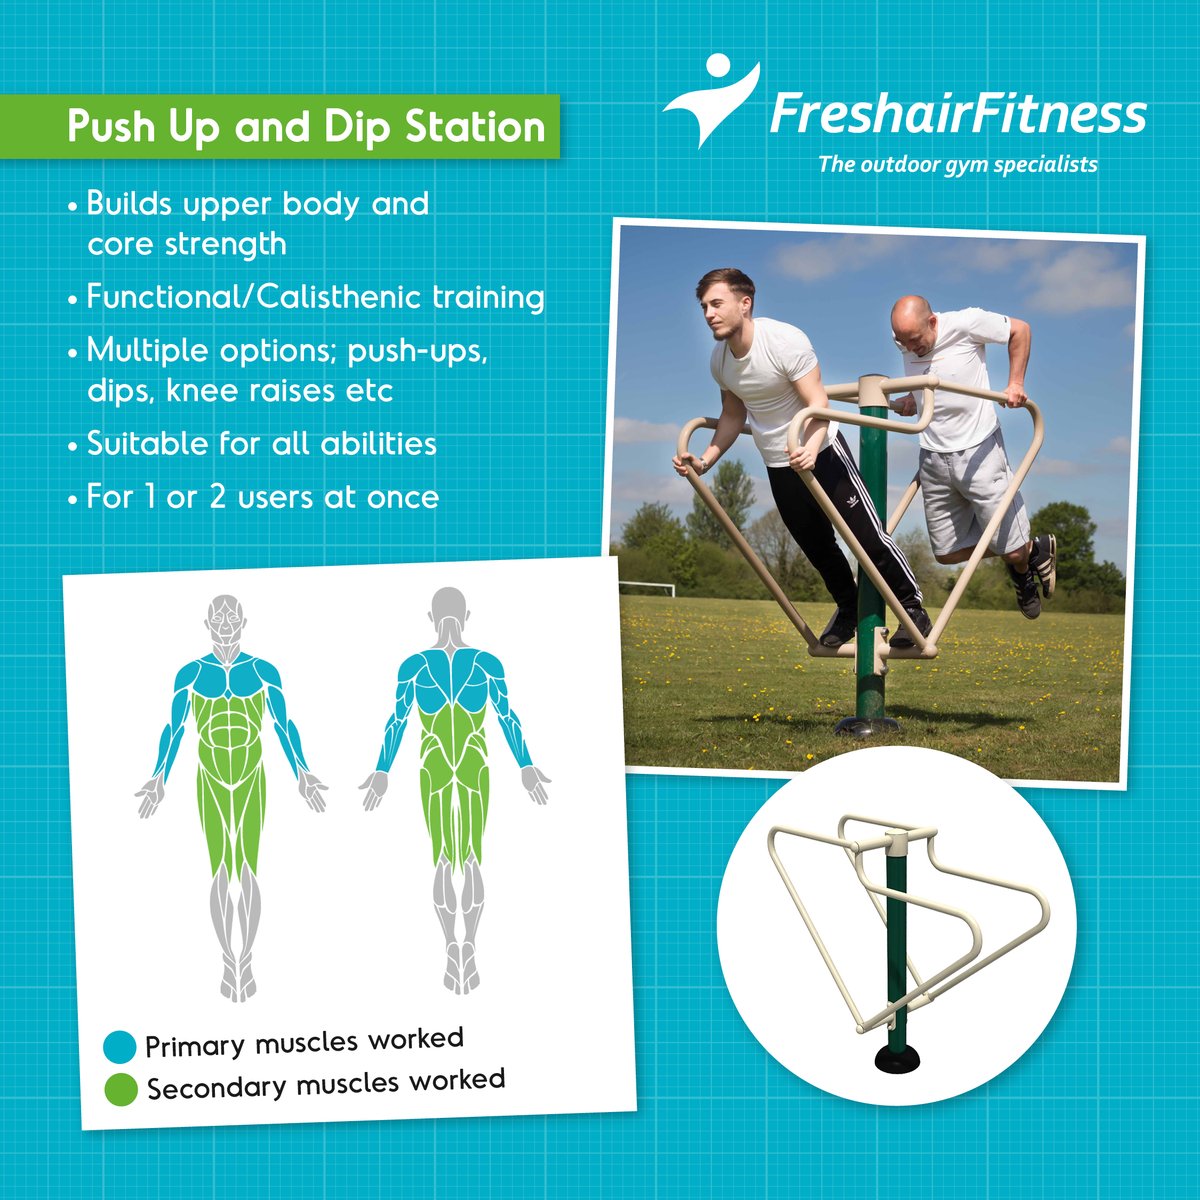 The Push Up and Dip Station can provide a full body workout (using only the user’s bodyweight) from one simple piece! #outdoorgym